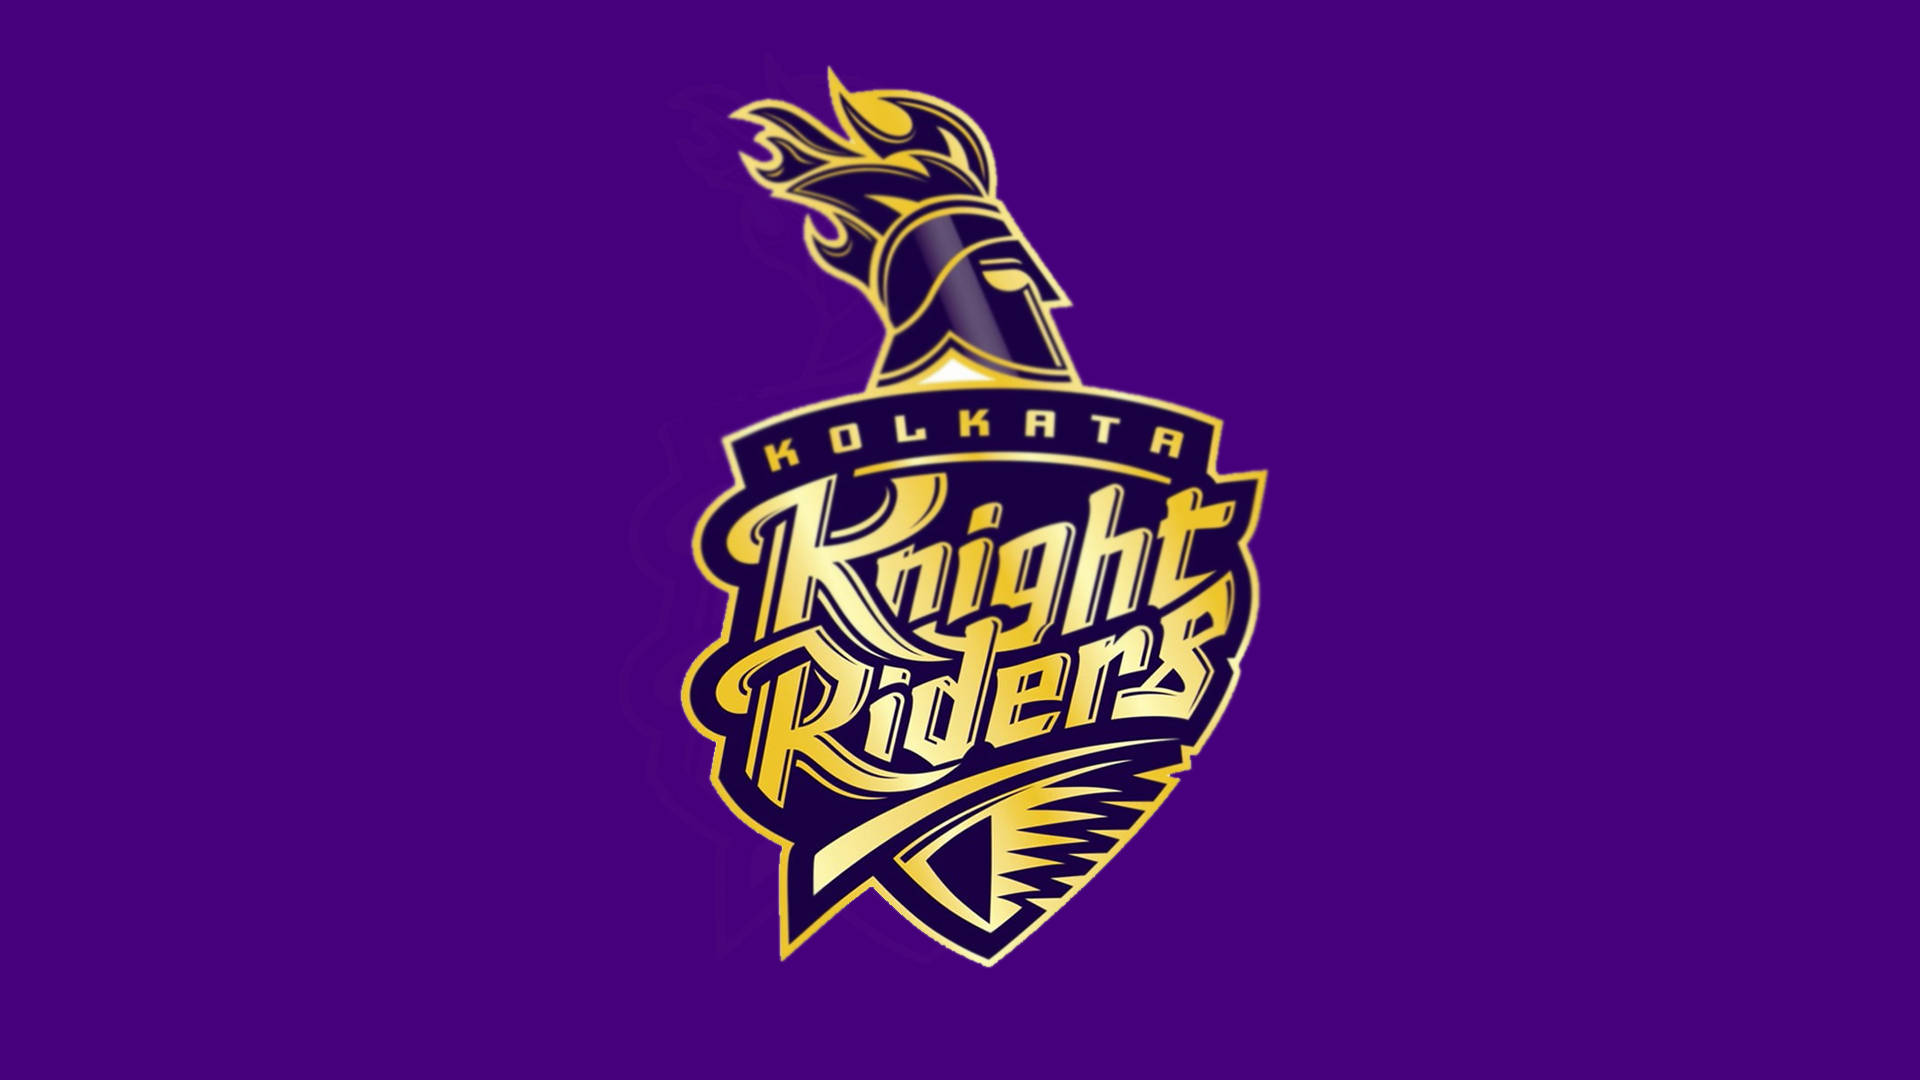 Riders Pictures Wallpaper